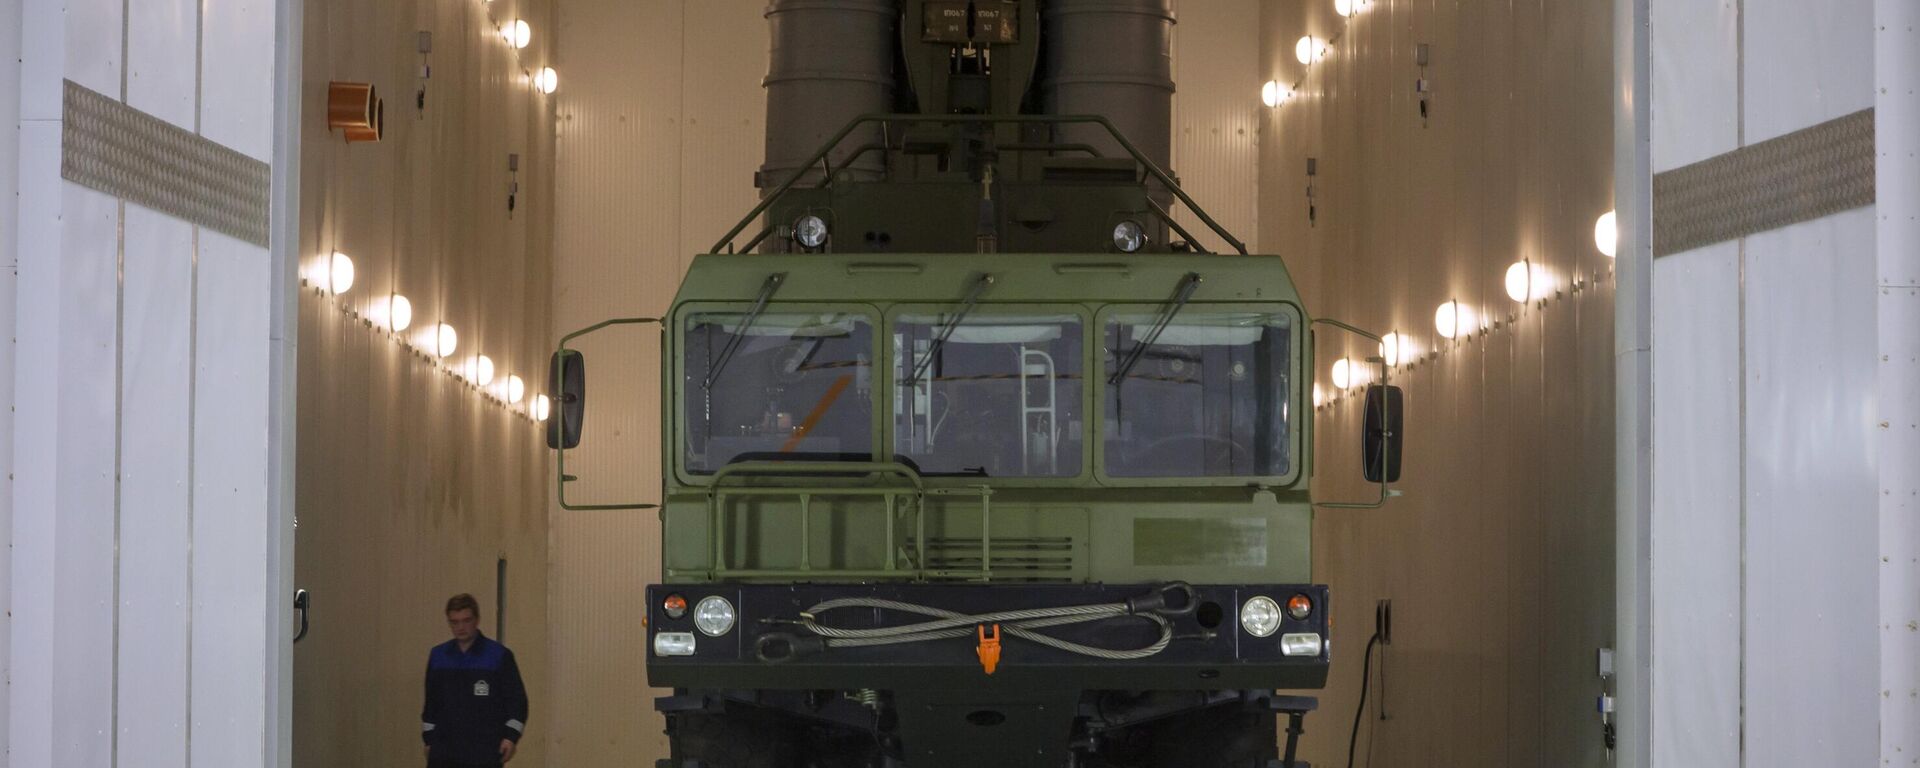 A S-400 air defense missile system stands in a testing camera during the opening of a testing facility in St. Petersburg, Russia, Friday, Jan. 23, 2015. The S-400 is Russia's latest long-range air defense missile system.  - Sputnik भारत, 1920, 21.03.2024